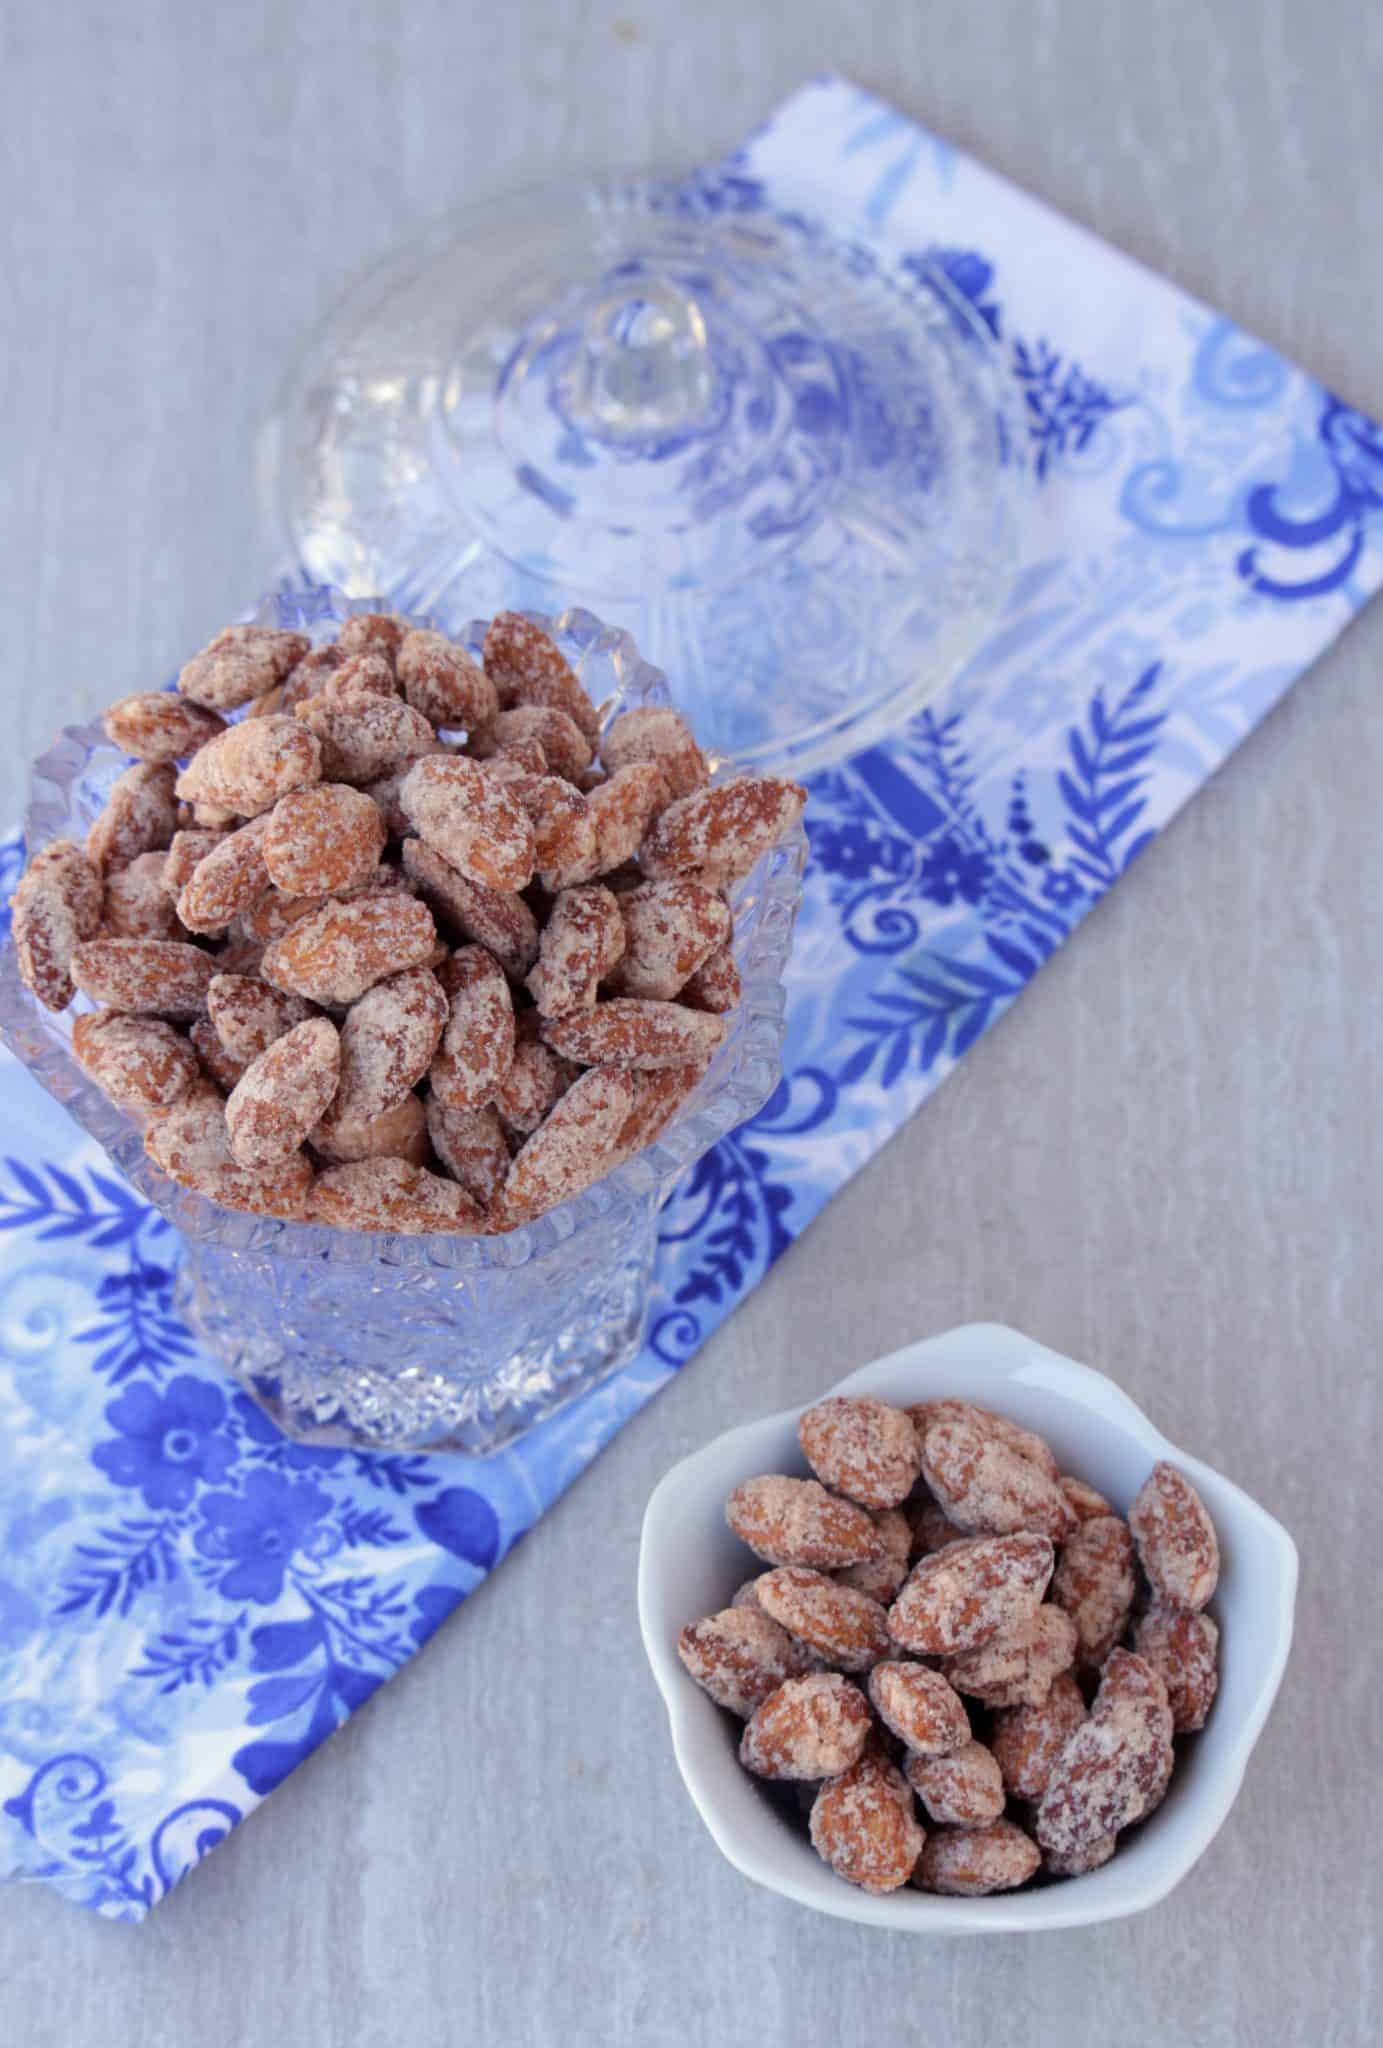 Candied Almonds in bowl and jar